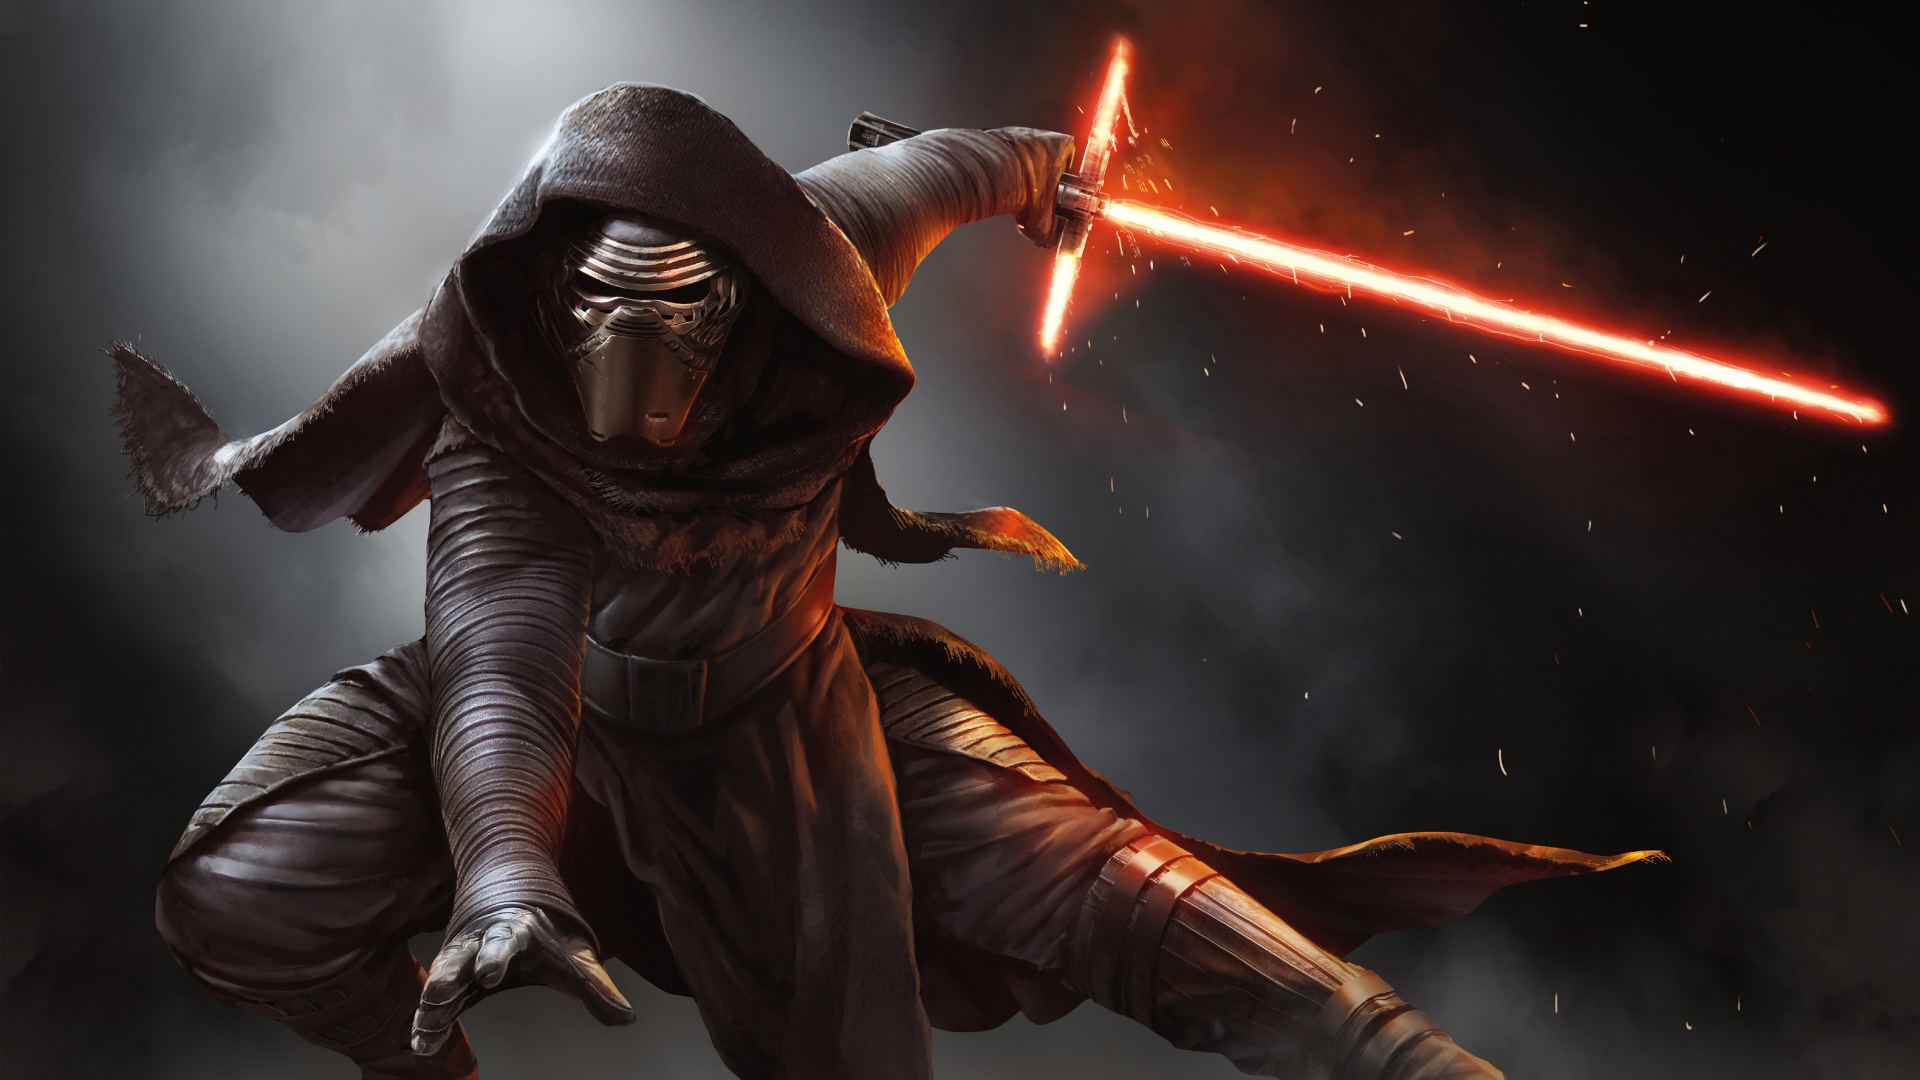 KYLO REN WALLPAPERS FREE Wallpapers Background images